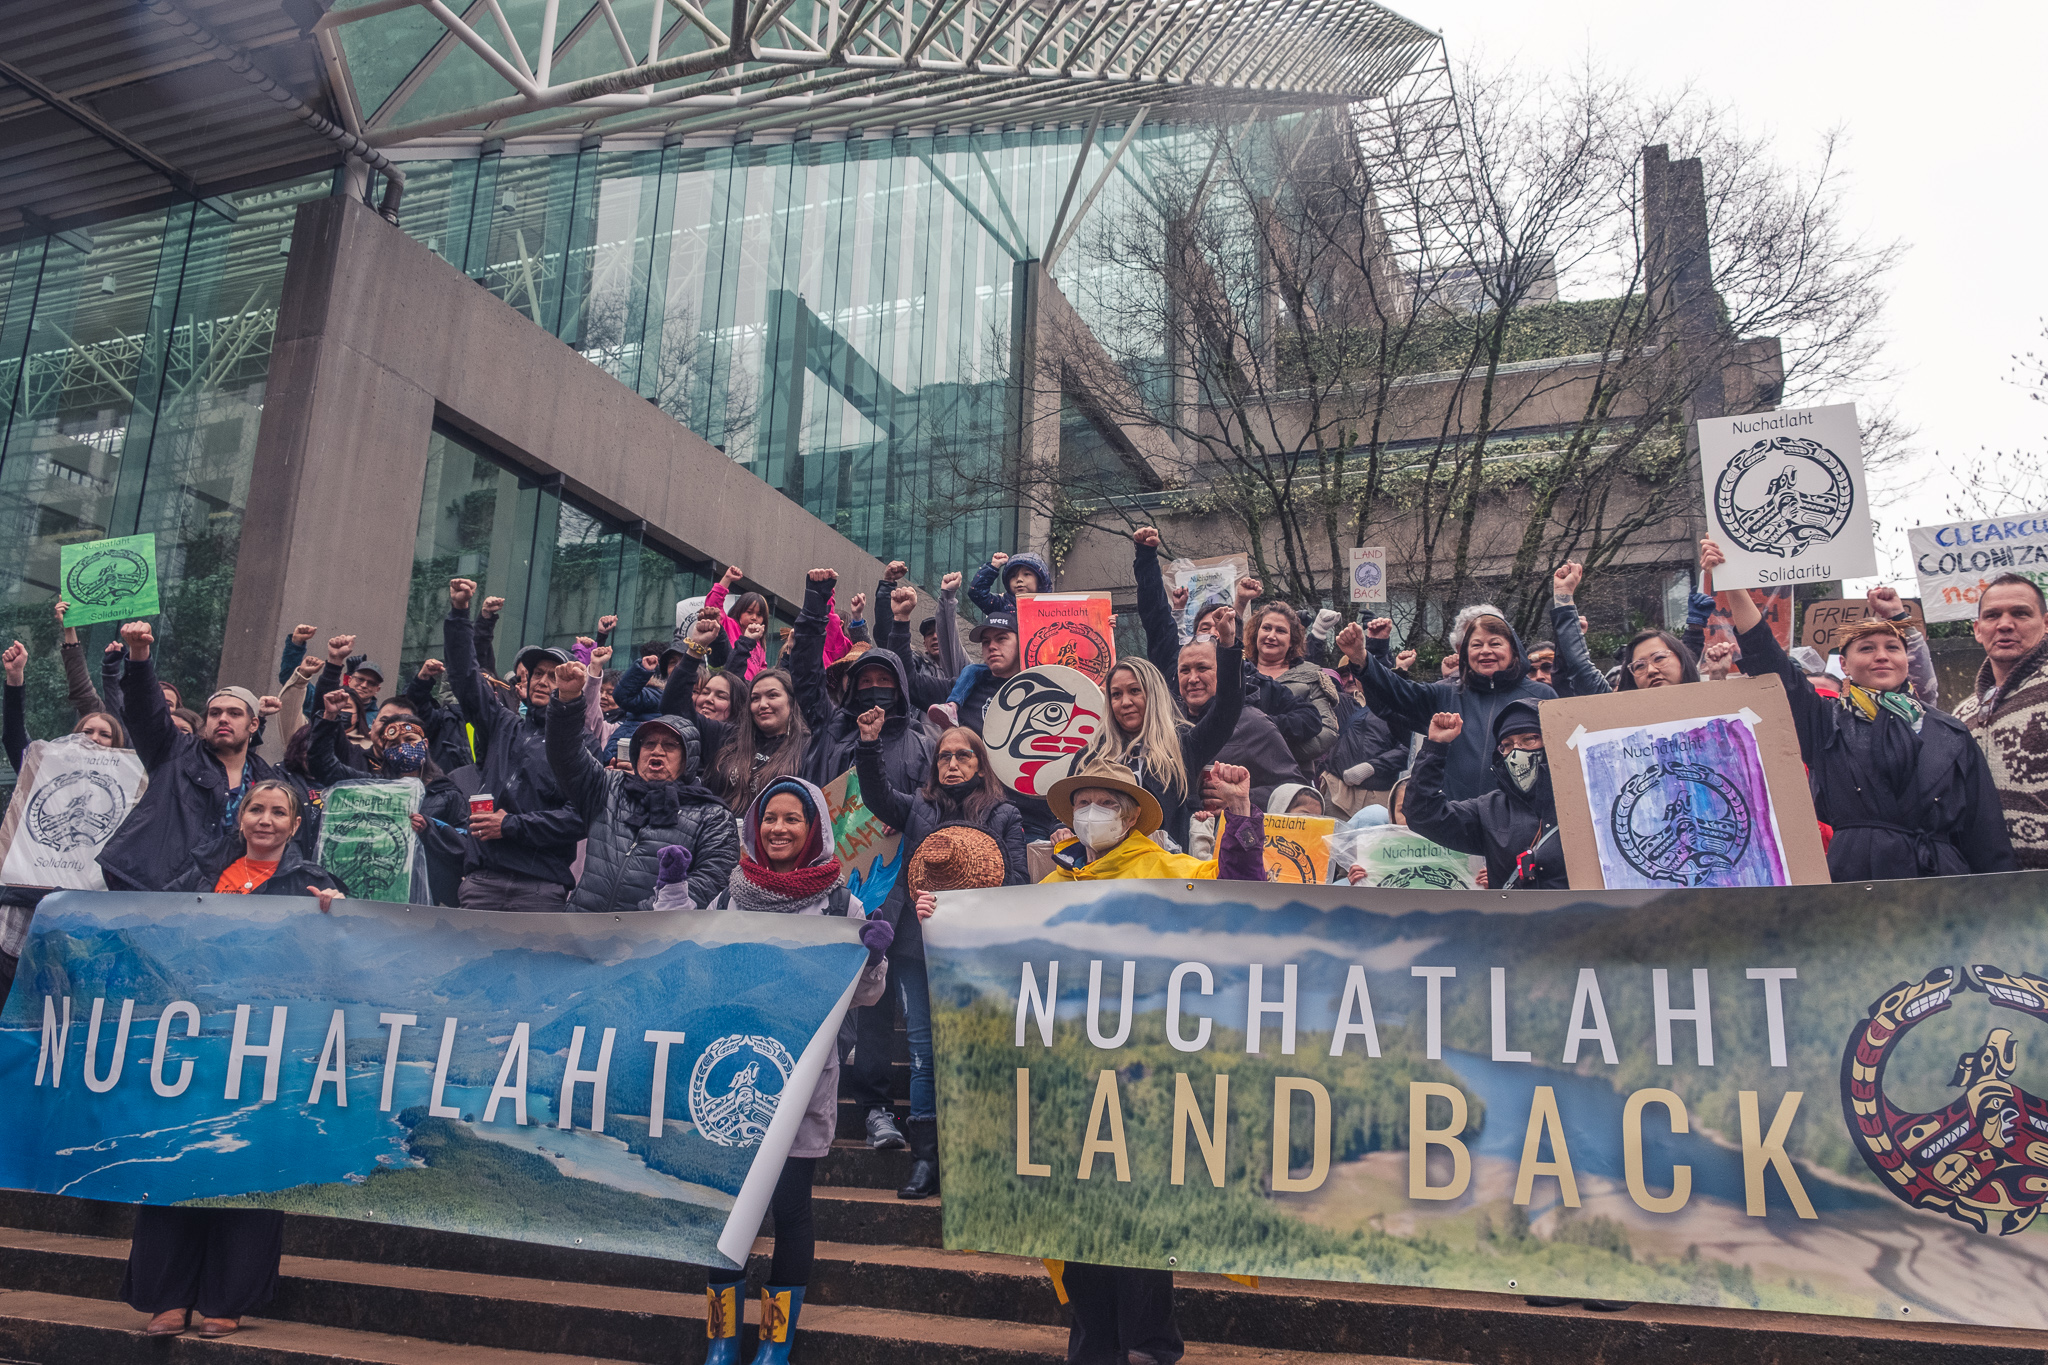 A group of people standing and holding up signs in support of Nuchatlaht. End of image description.